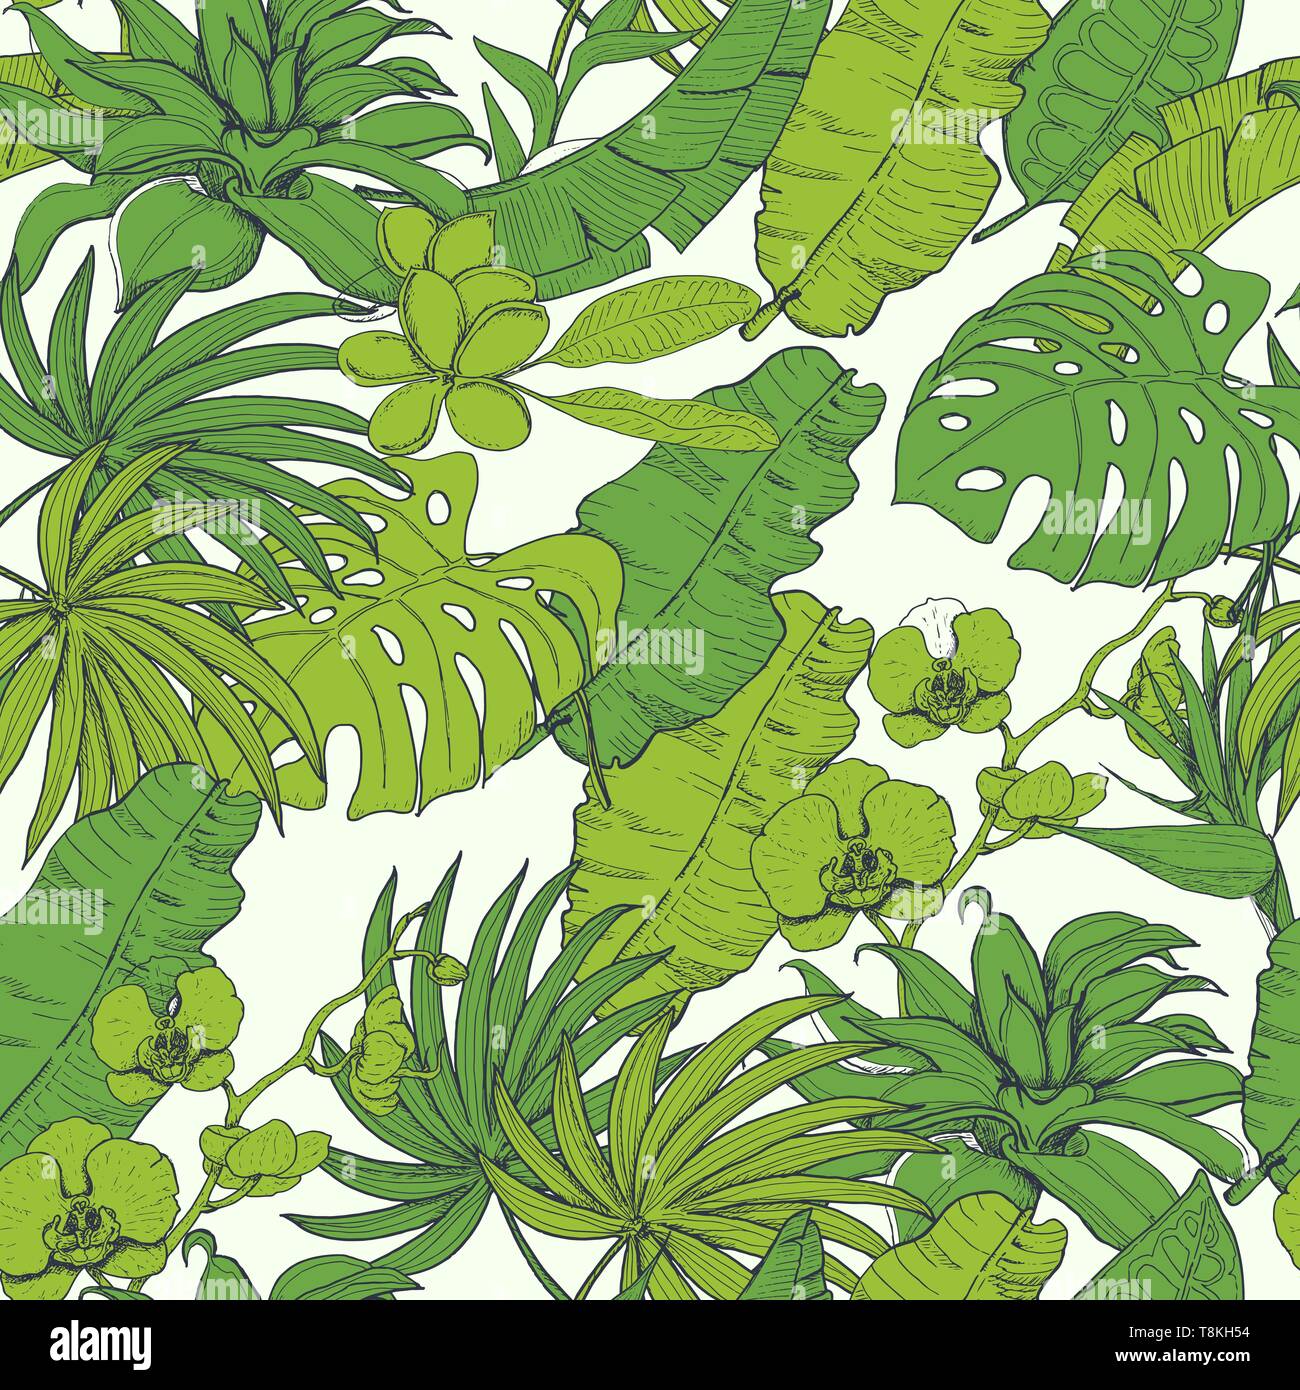 Seamless pattern with tropical plants and flowers. Vector illustration for your design Stock Vector